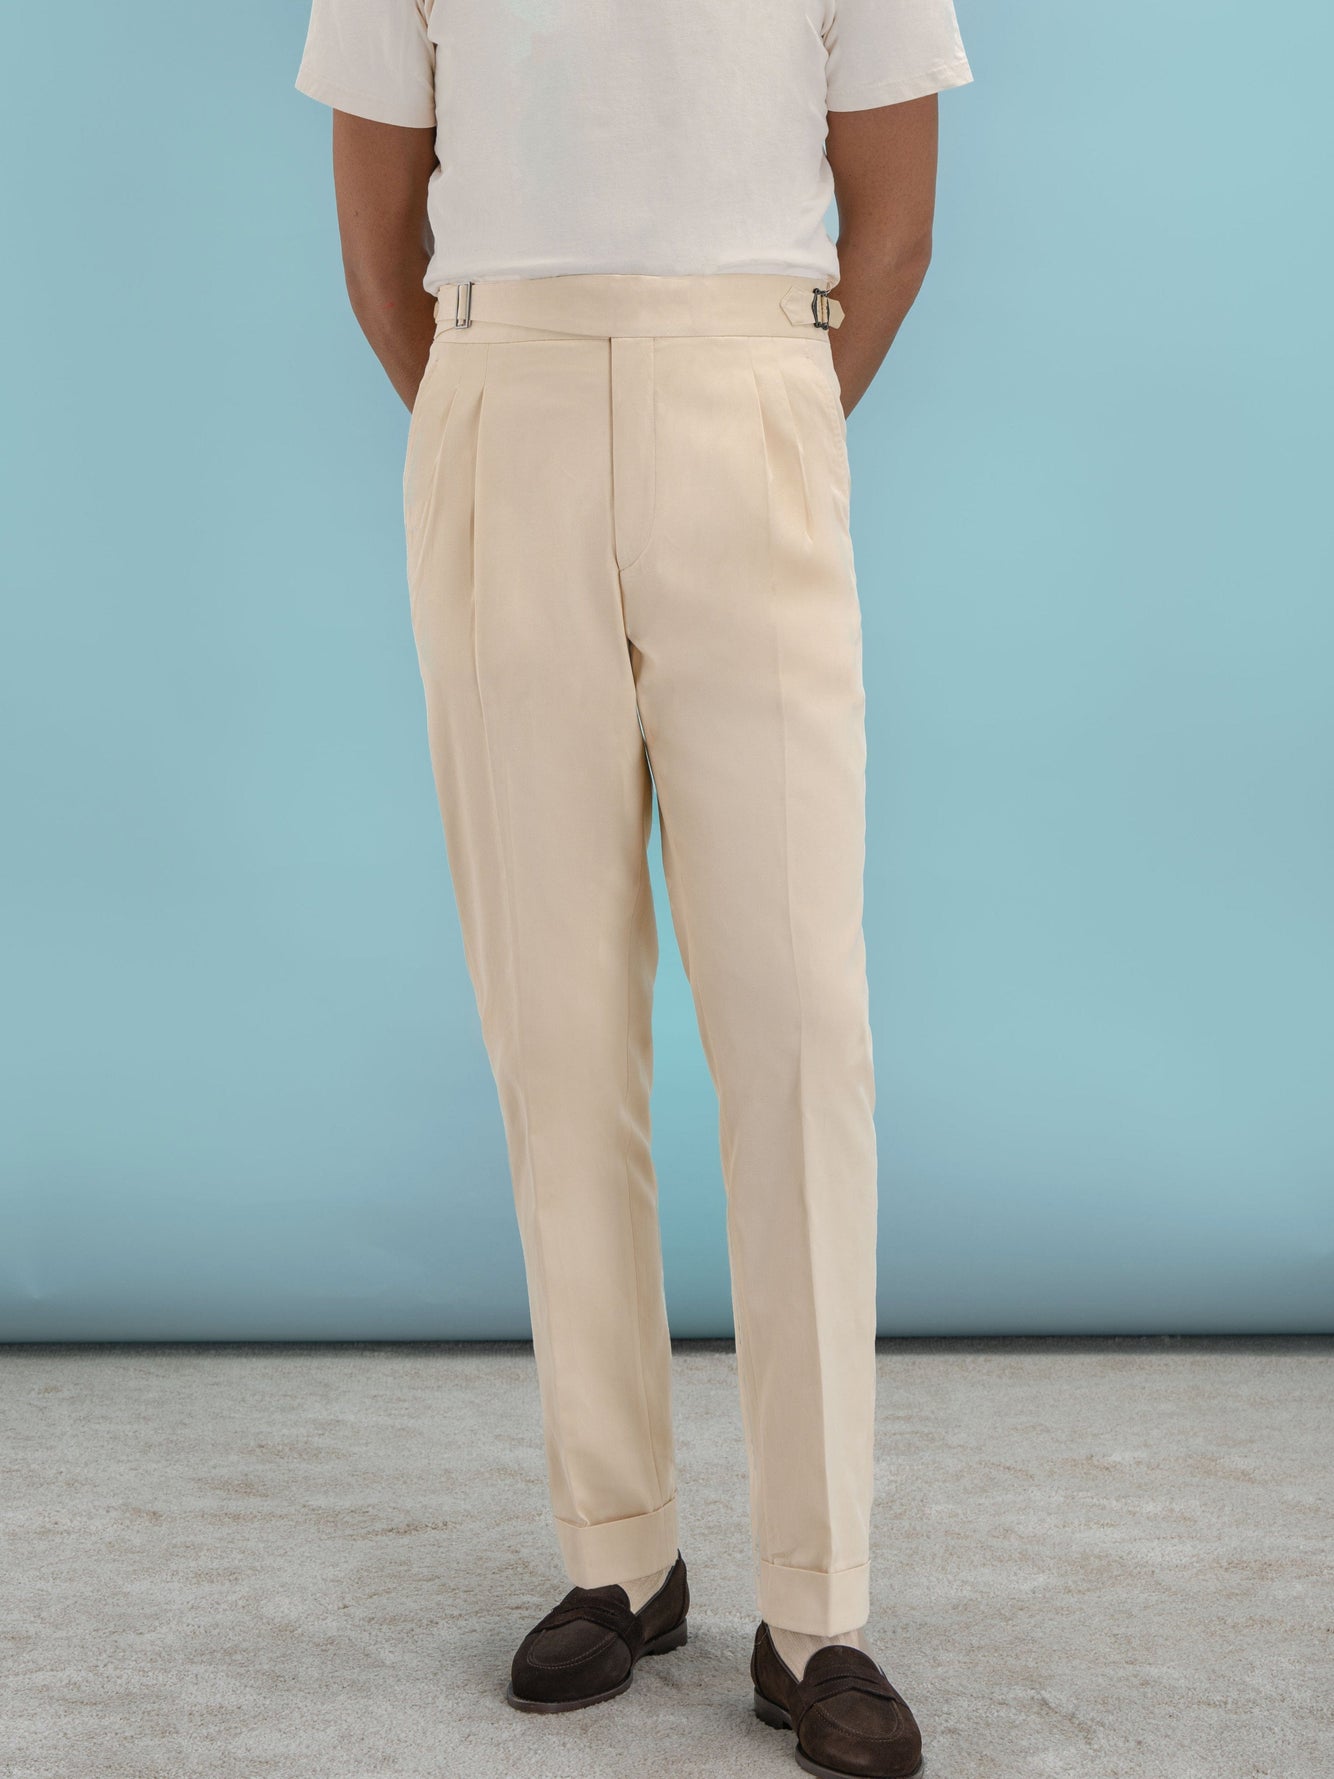 Beige trousers for men with side pockets - Exibit